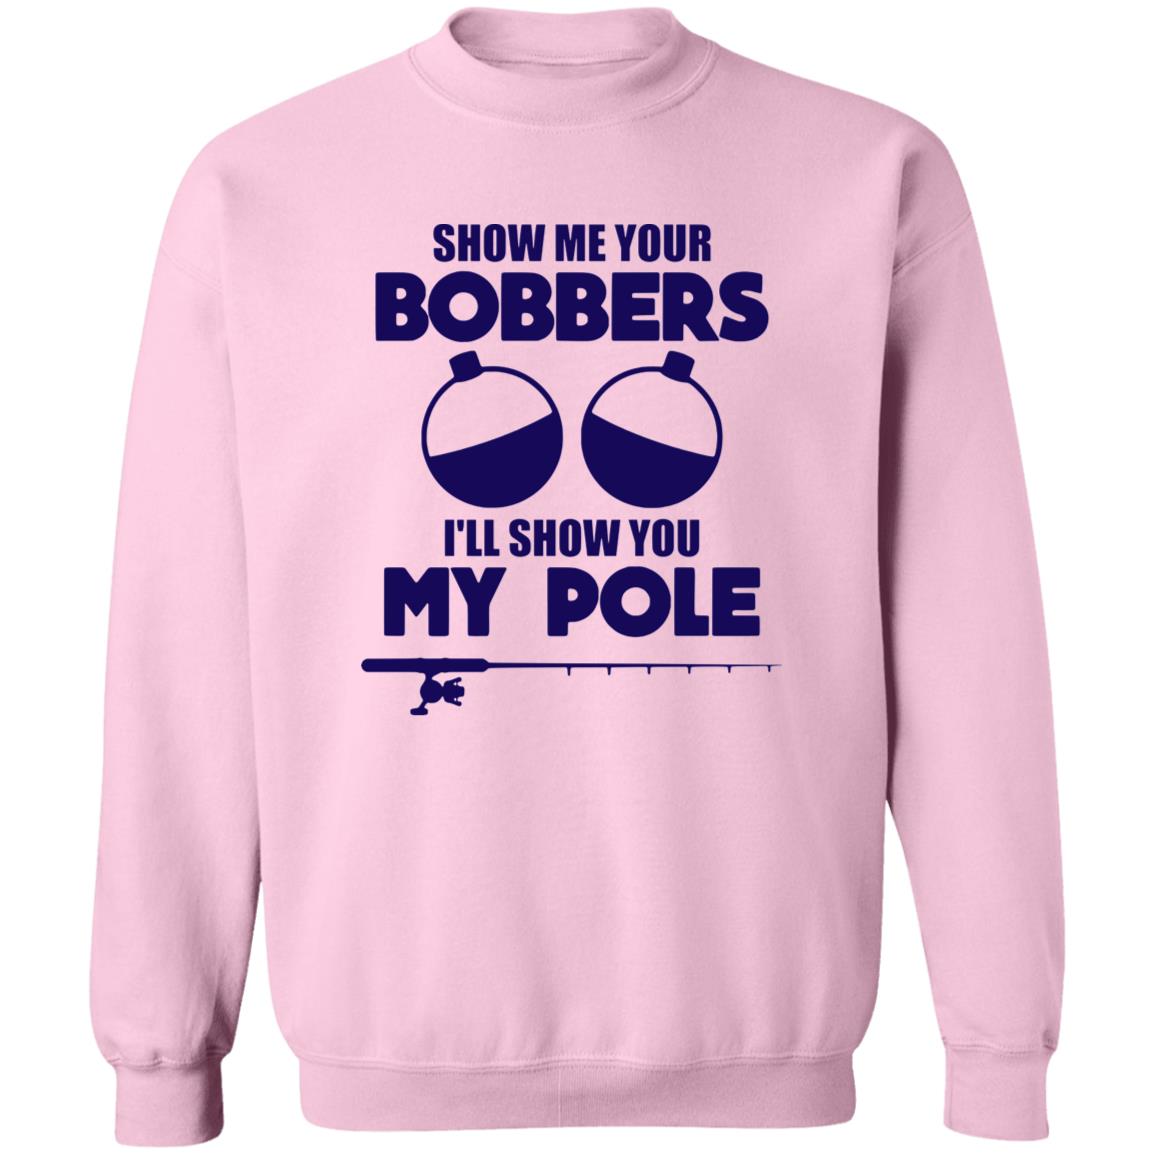 ***2 SIDED***  HRCL FL - Navy Show Me Your Bobbers I'll Show You My Pole - 2 Sided G180 Crewneck Pullover Sweatshirt